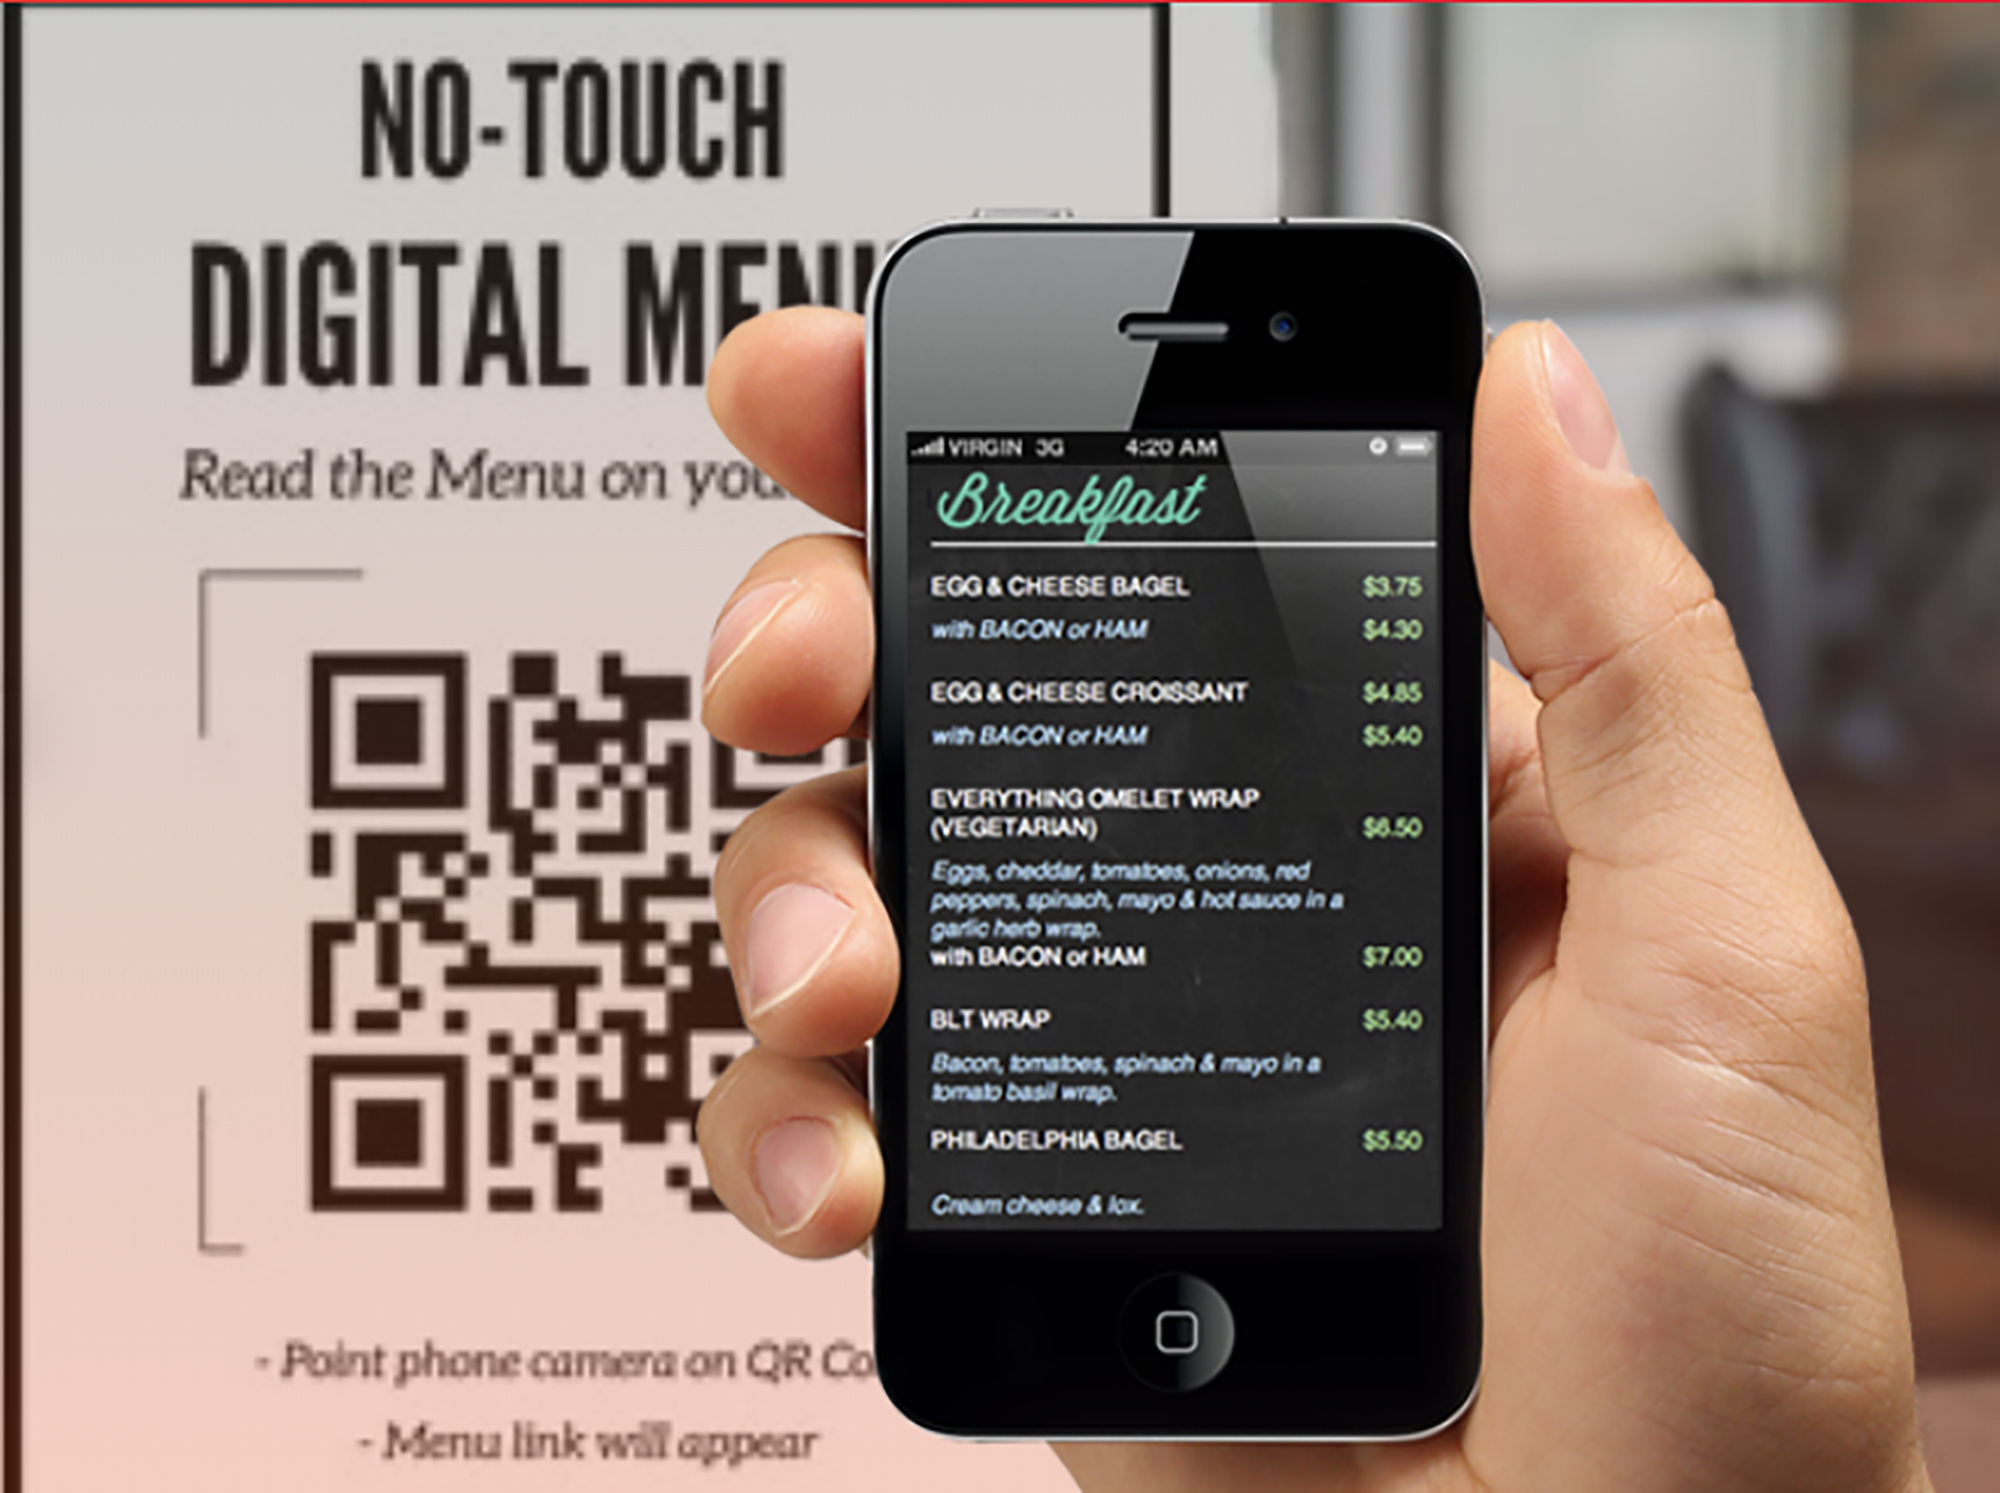 Customers using Menuat’s technology can scan a QR code with their smartphone camera to bring up the restaurant’s menu. It’s a sanitary solution to traditional menus amid the COVID-19 pandemic.